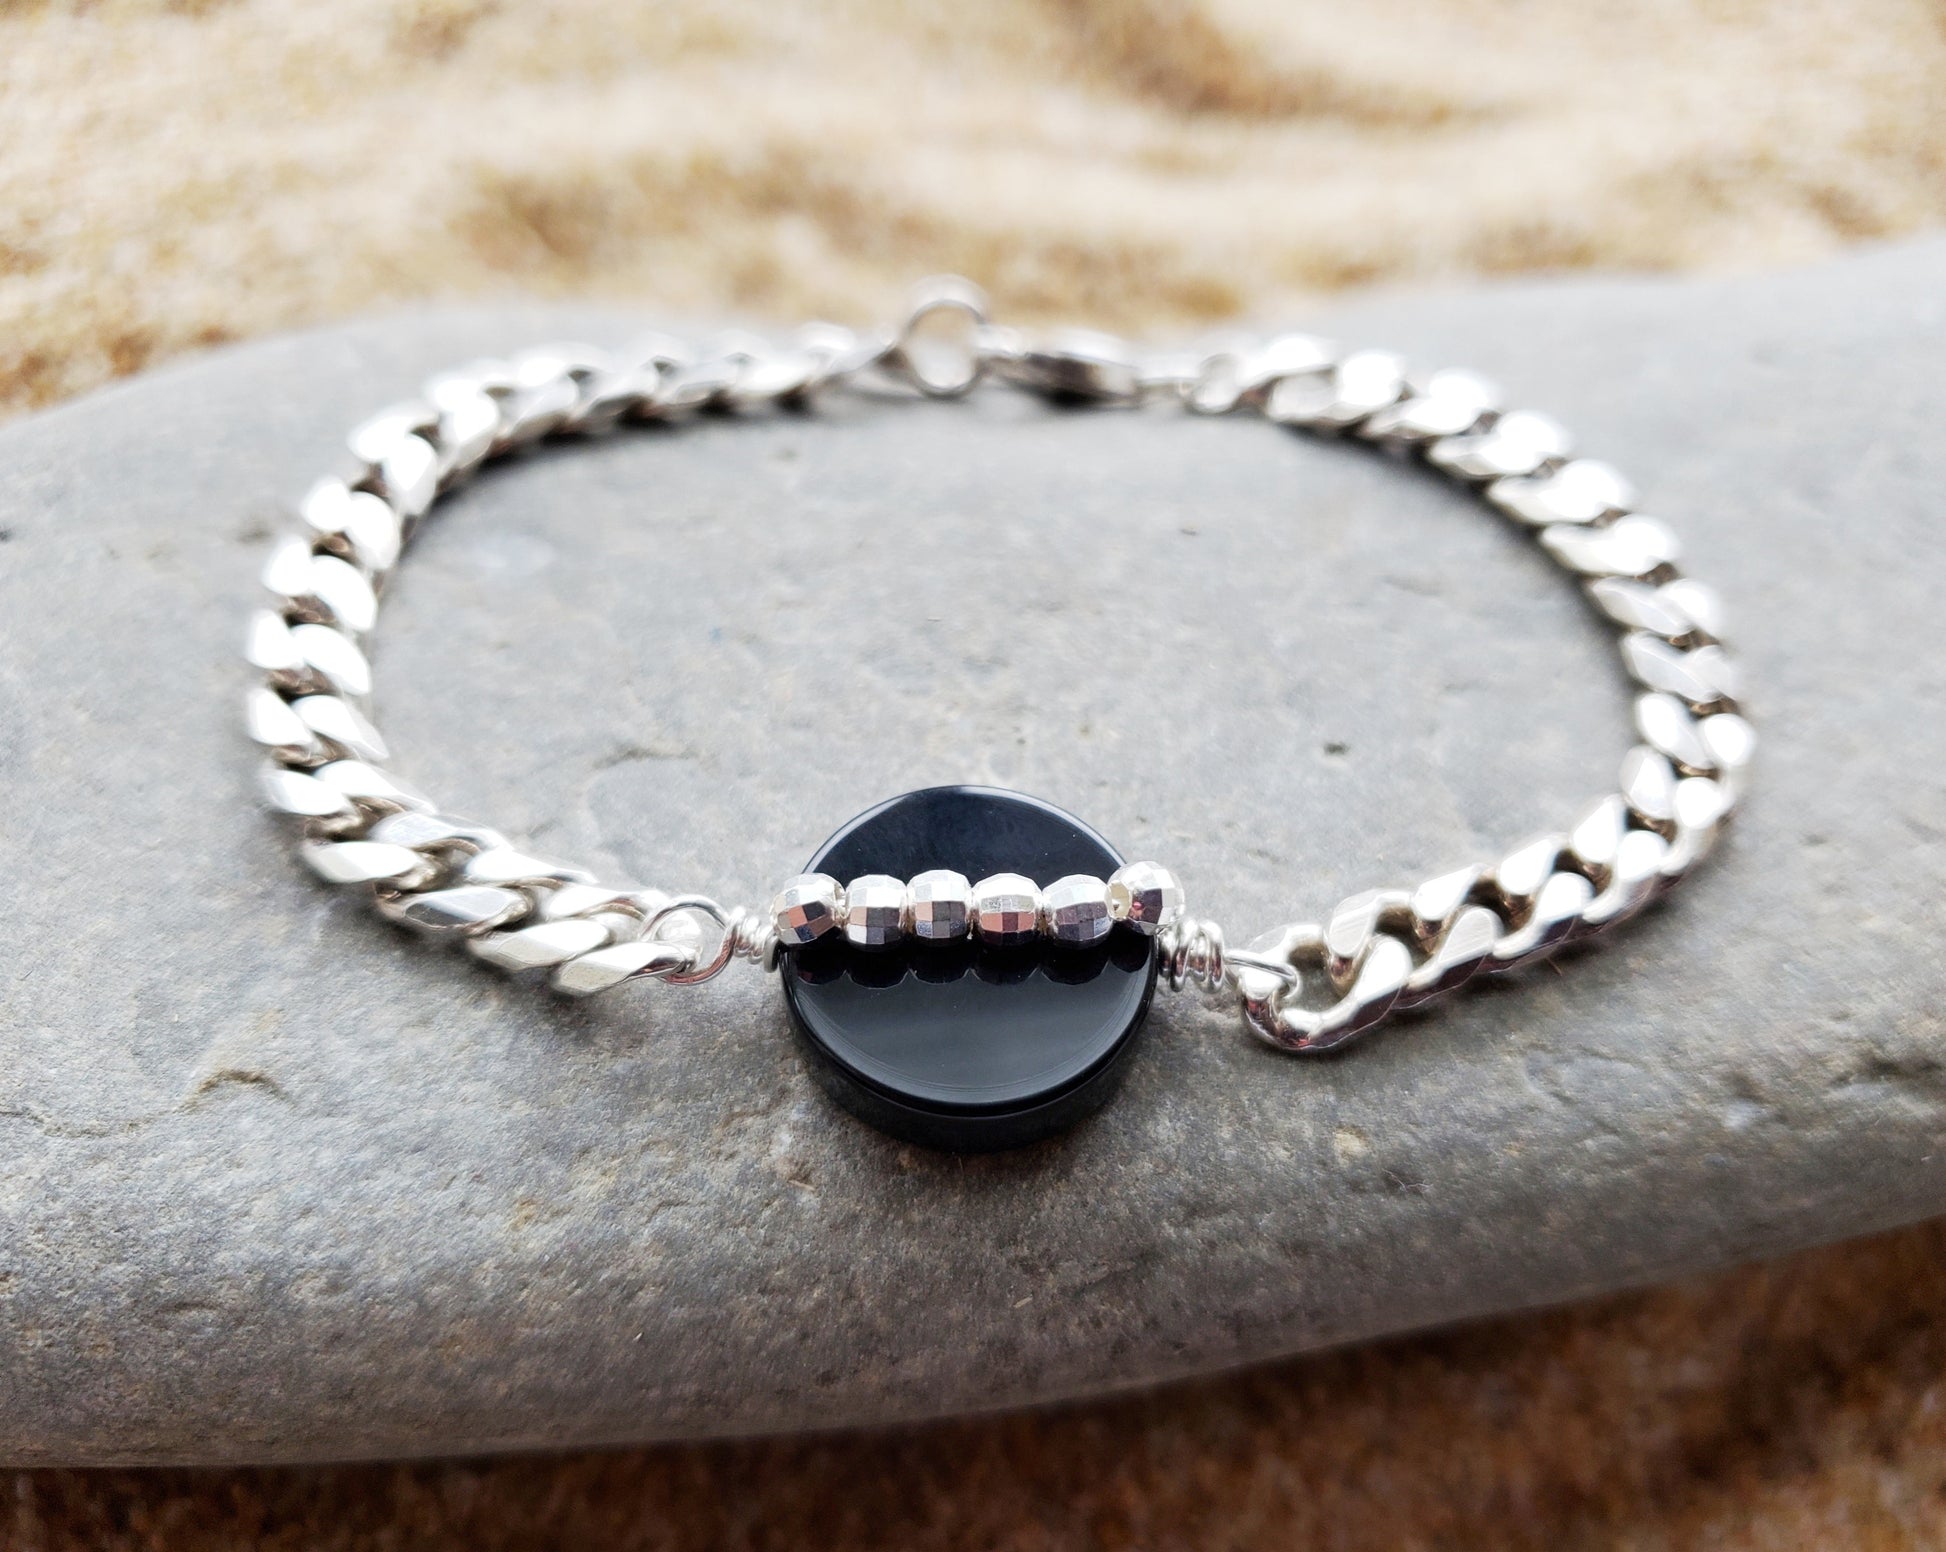 Path of Light Black Onyx Bracelet, Upcycled, Repurposed Sterling Silver Chain, round Disk shaped Onyx stone in centre with a line of sparkly Sterling Silver beads. Displayed on Stone